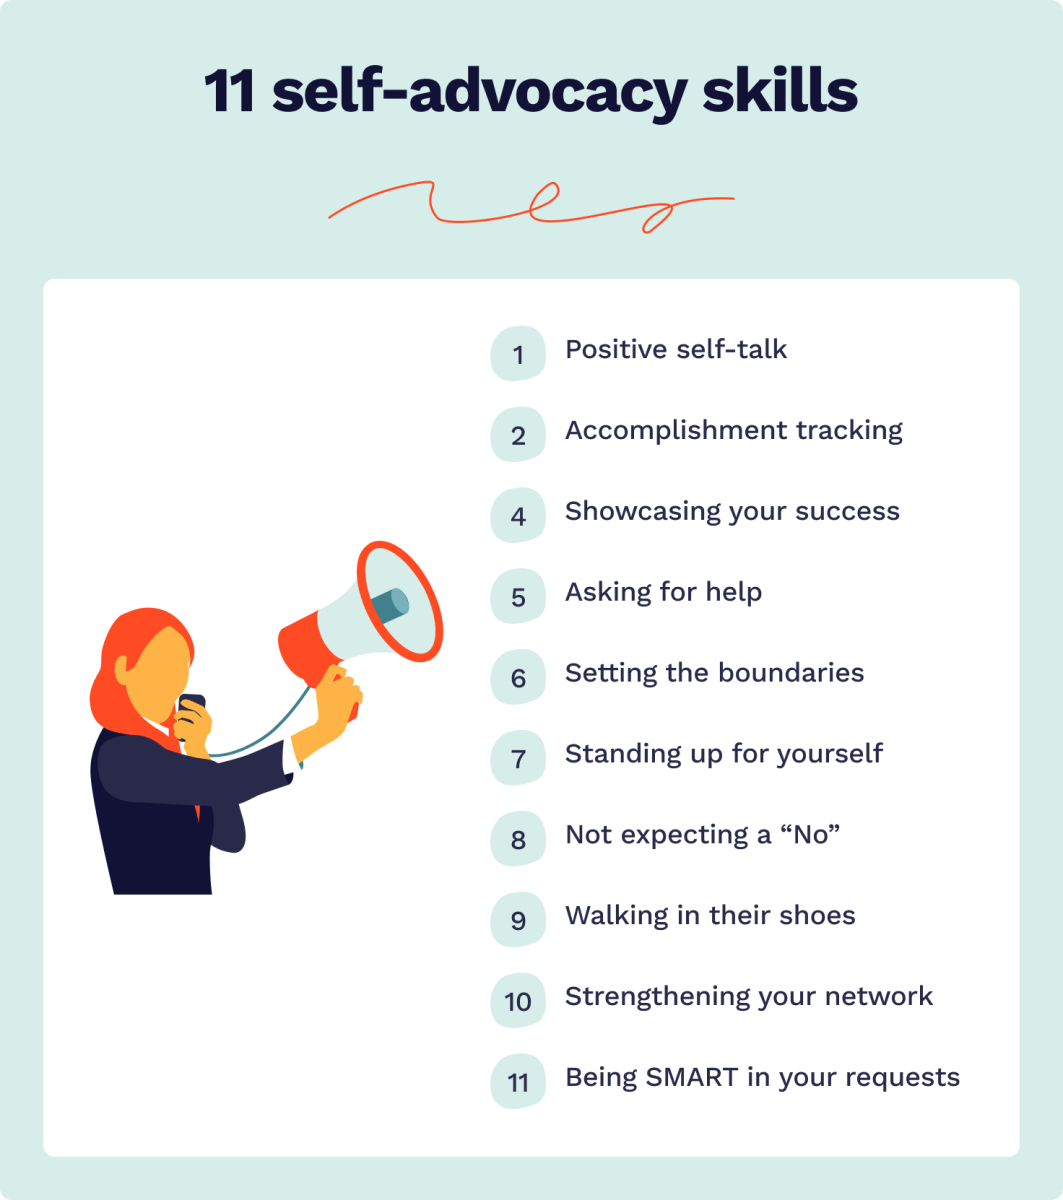 The picture lists 11 essential self-advocacy skills.